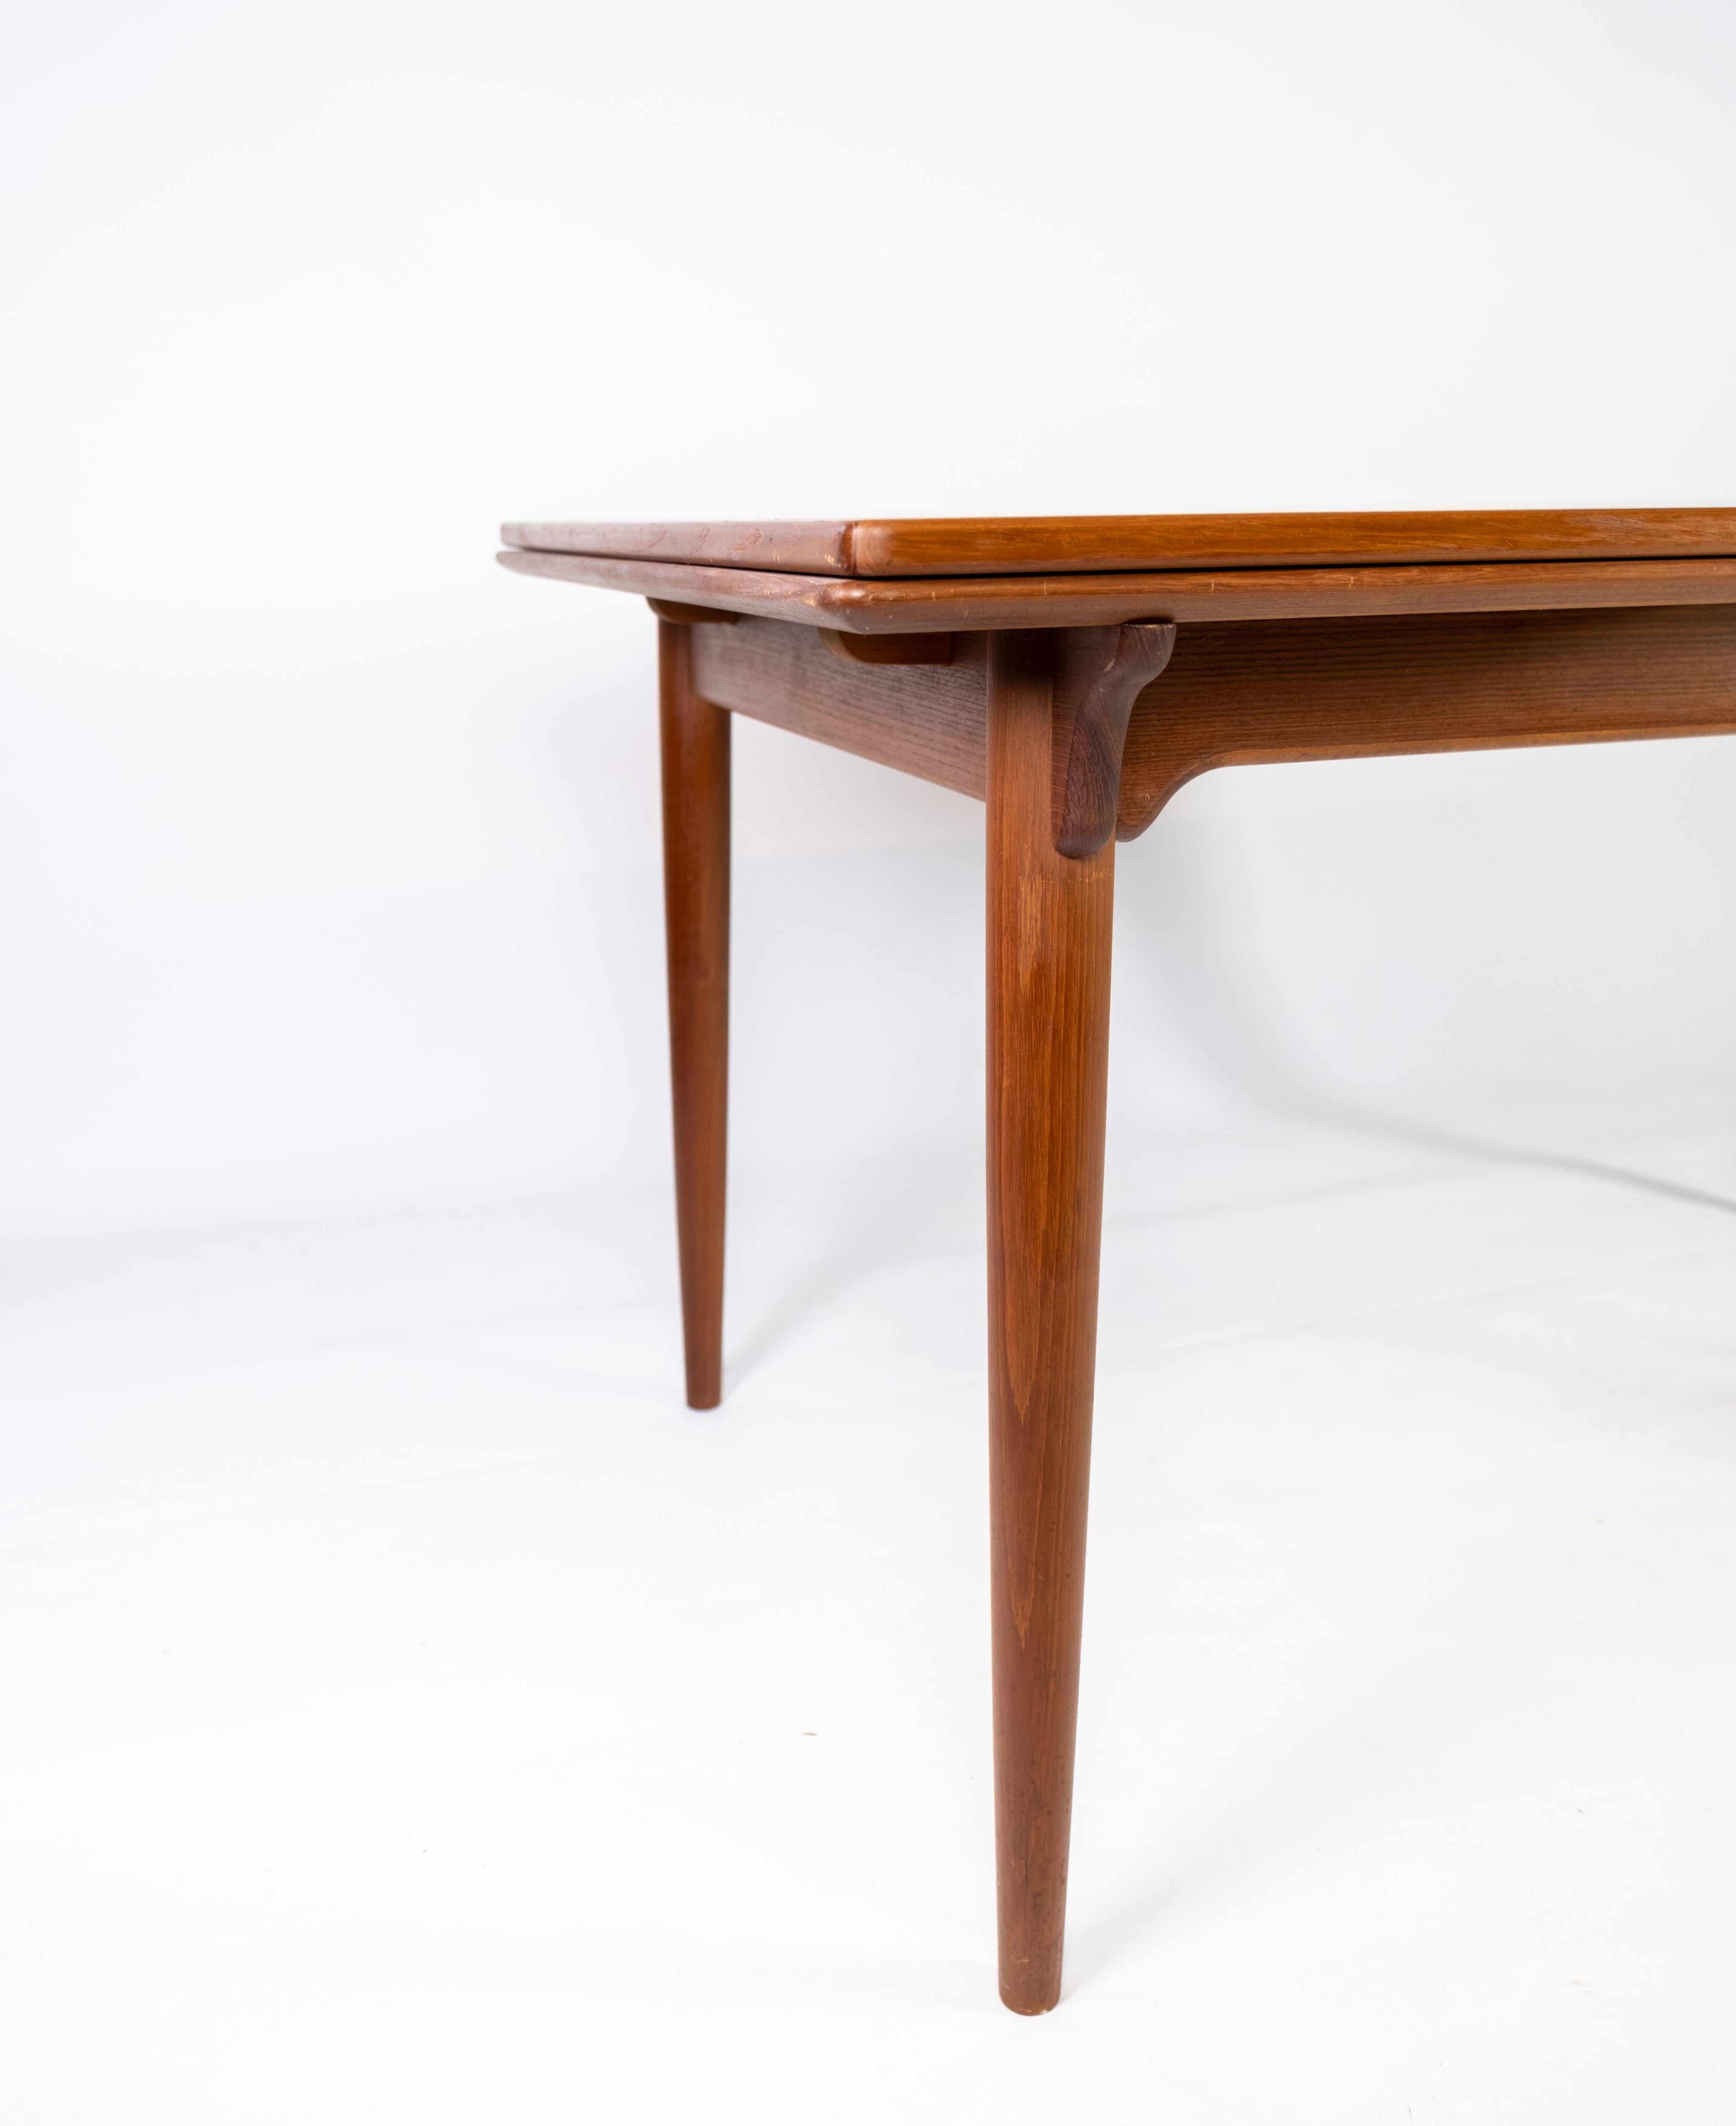 Dining Table Made In Teak With Extentions, Danish Design From 1960s In Good Condition For Sale In Lejre, DK